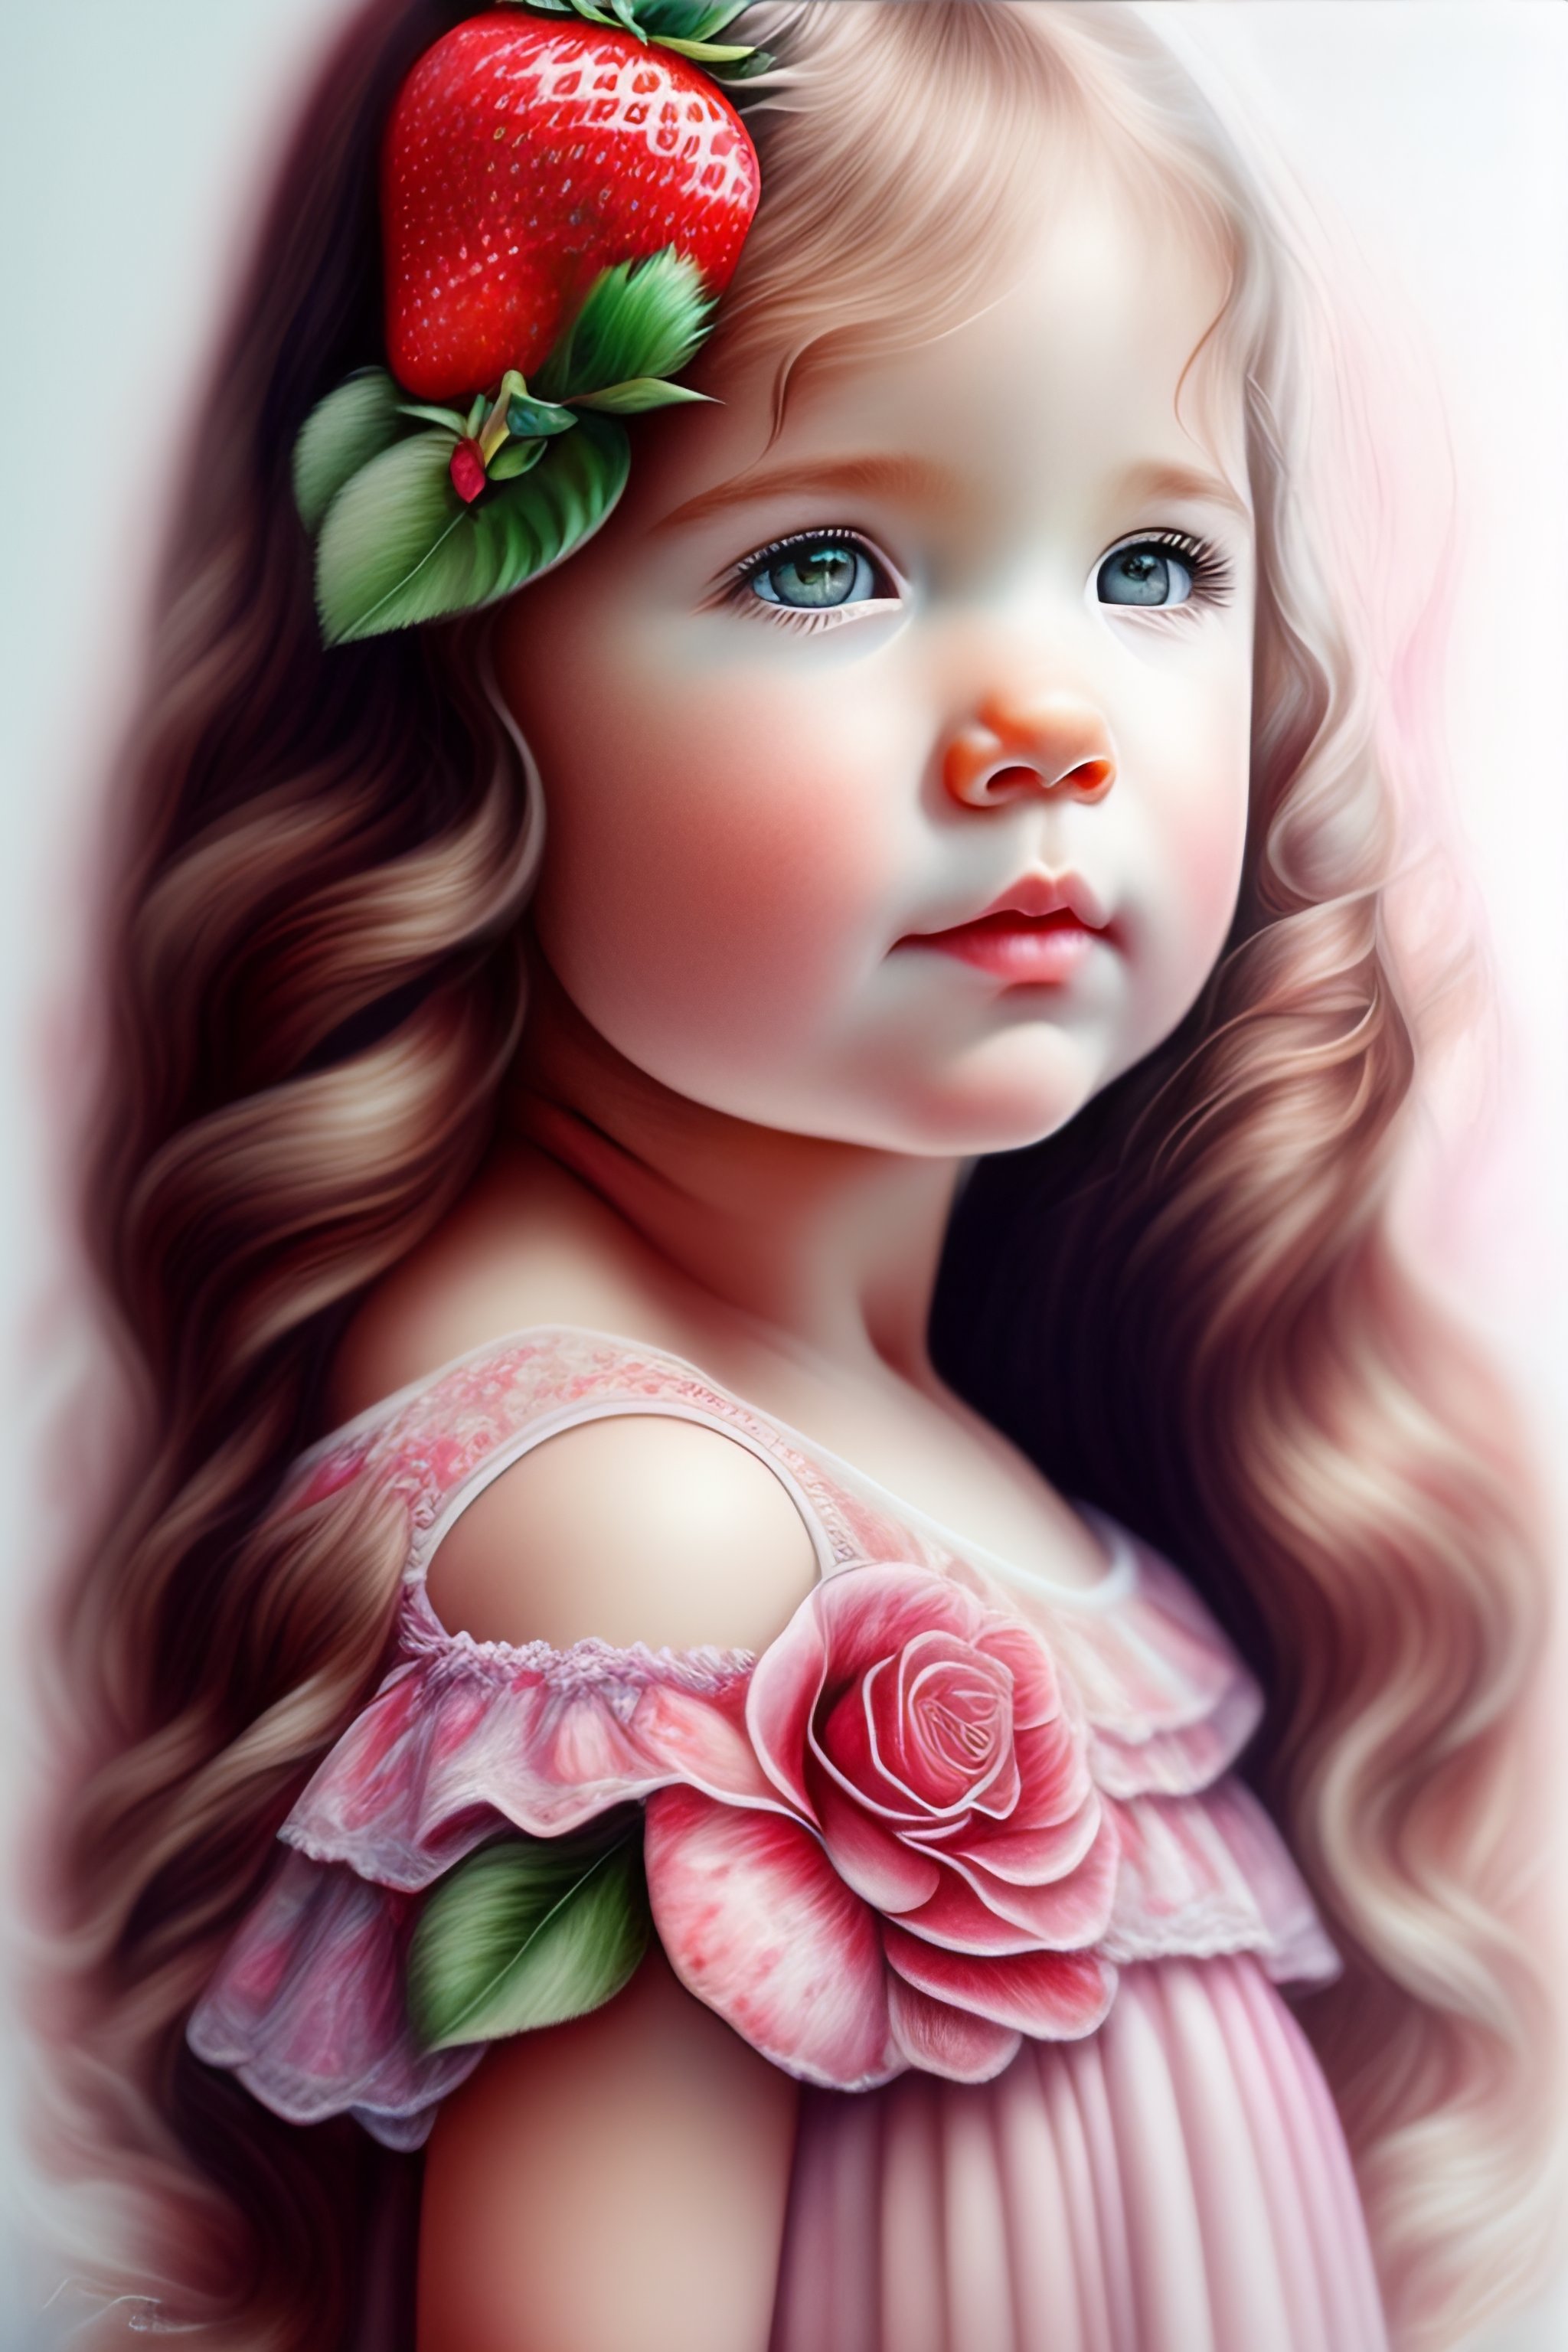 realistic girl drawing color